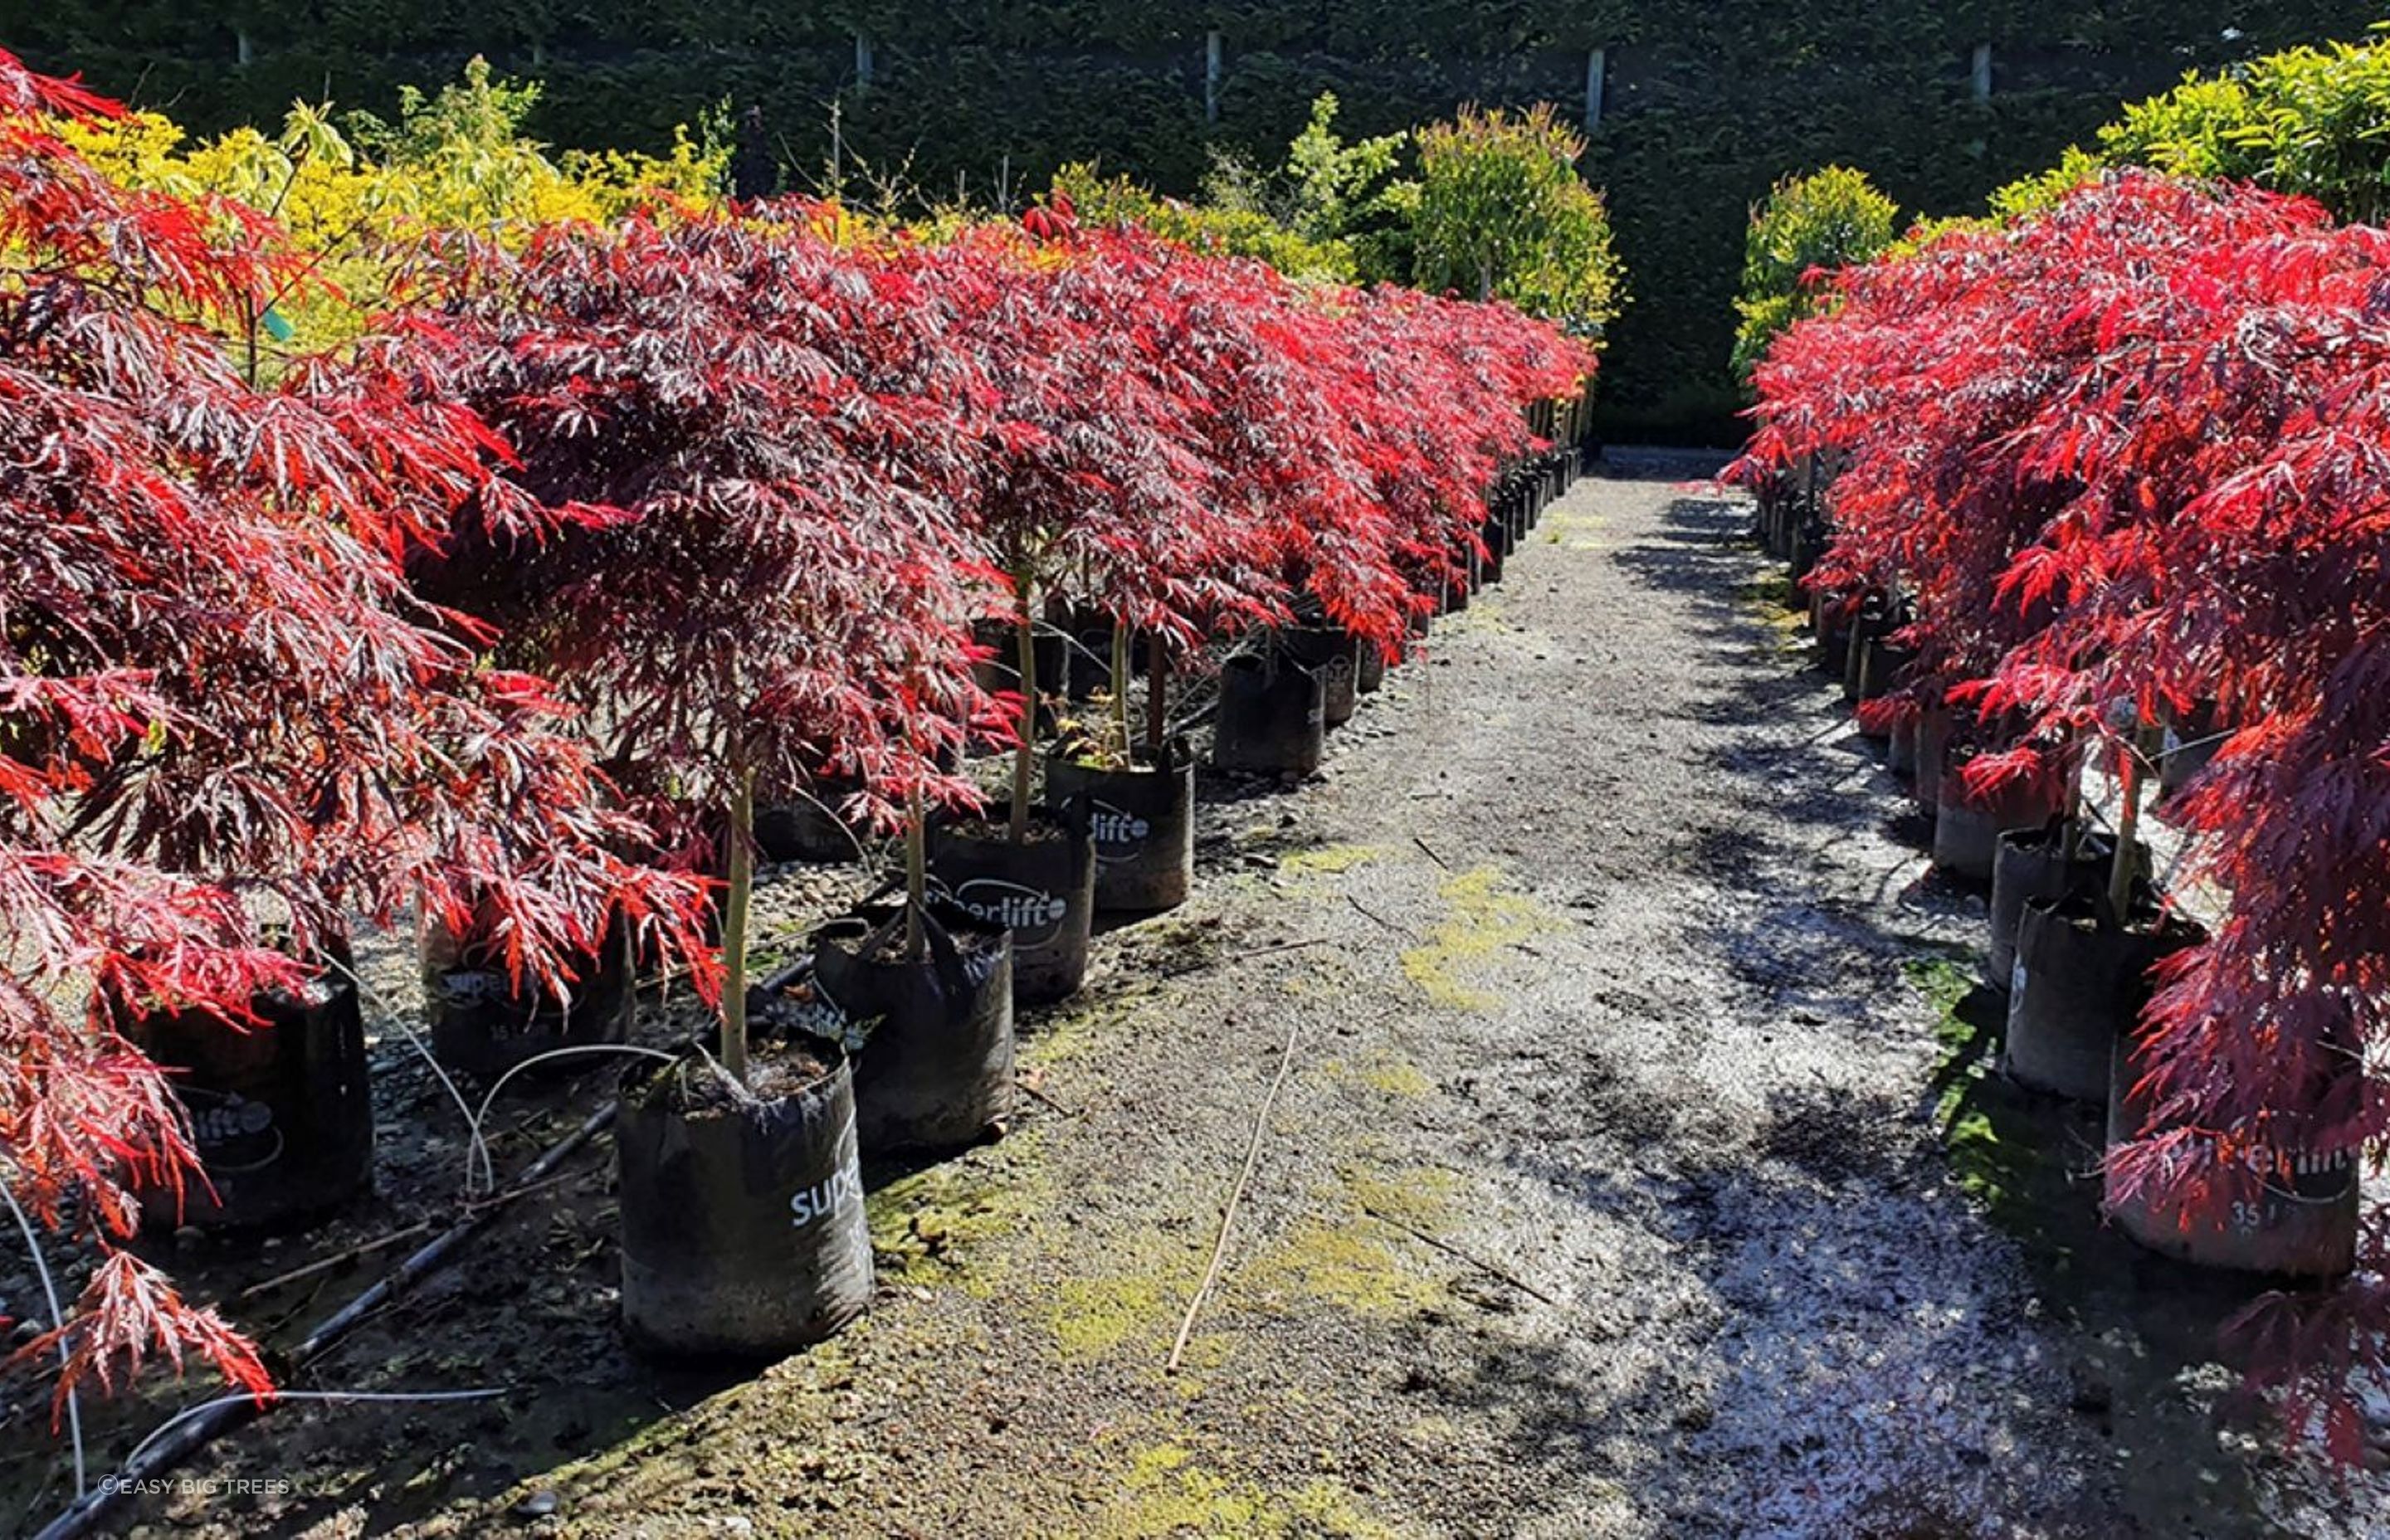 The modest growth and fabulous foliage of Acer Palmatum 'Atropurpureum' (Purple Japanese Maple) makes it a eye-catching option for a small garden.